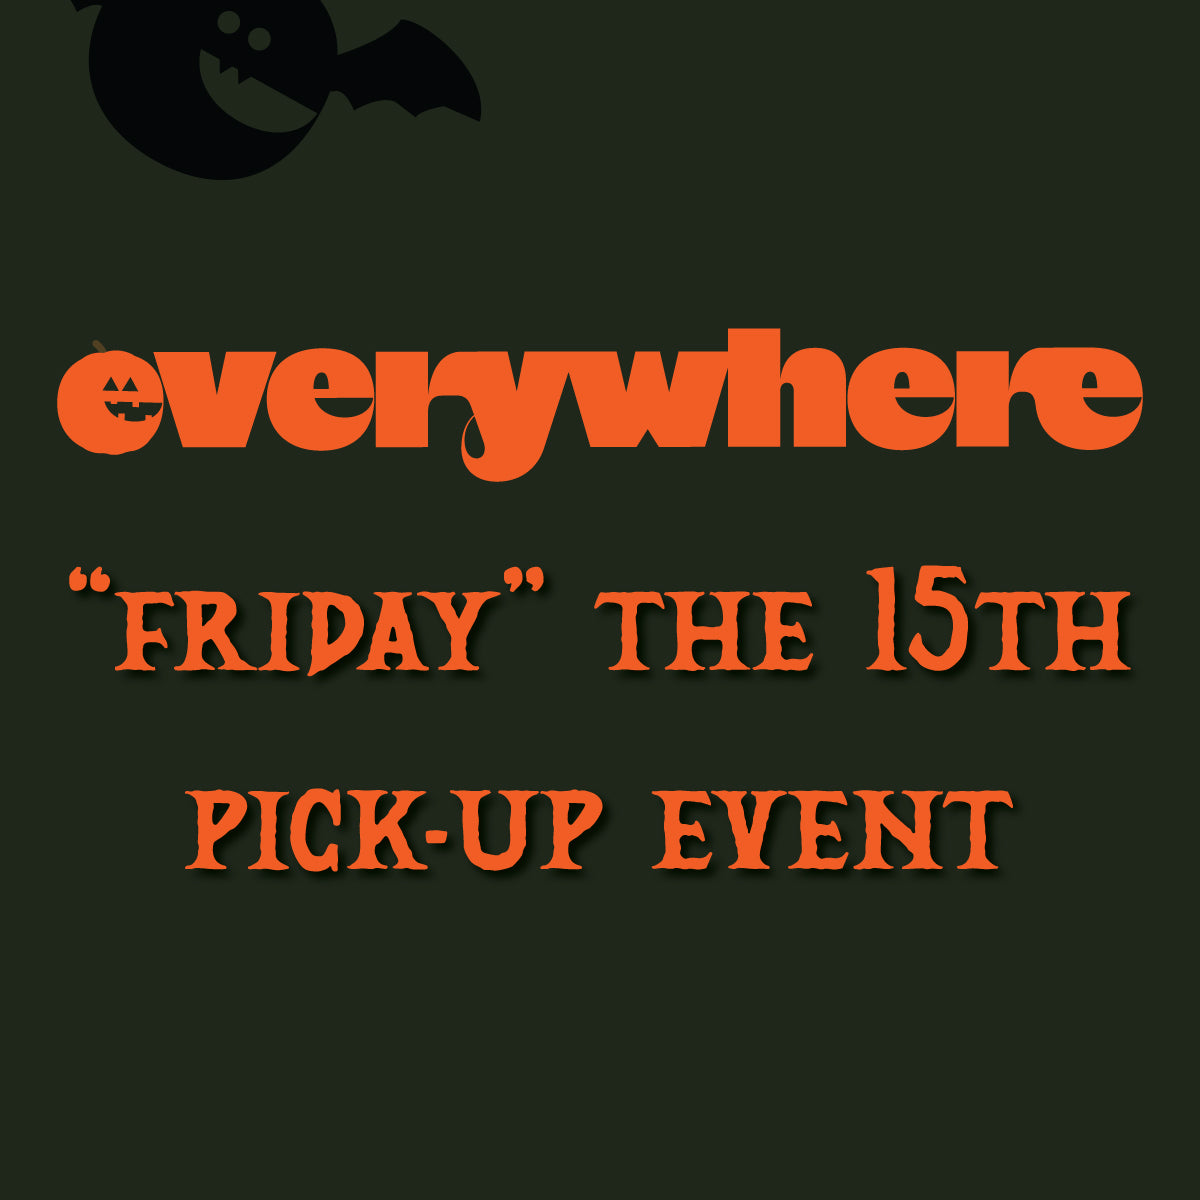 "Friday" the 15th pick-up event